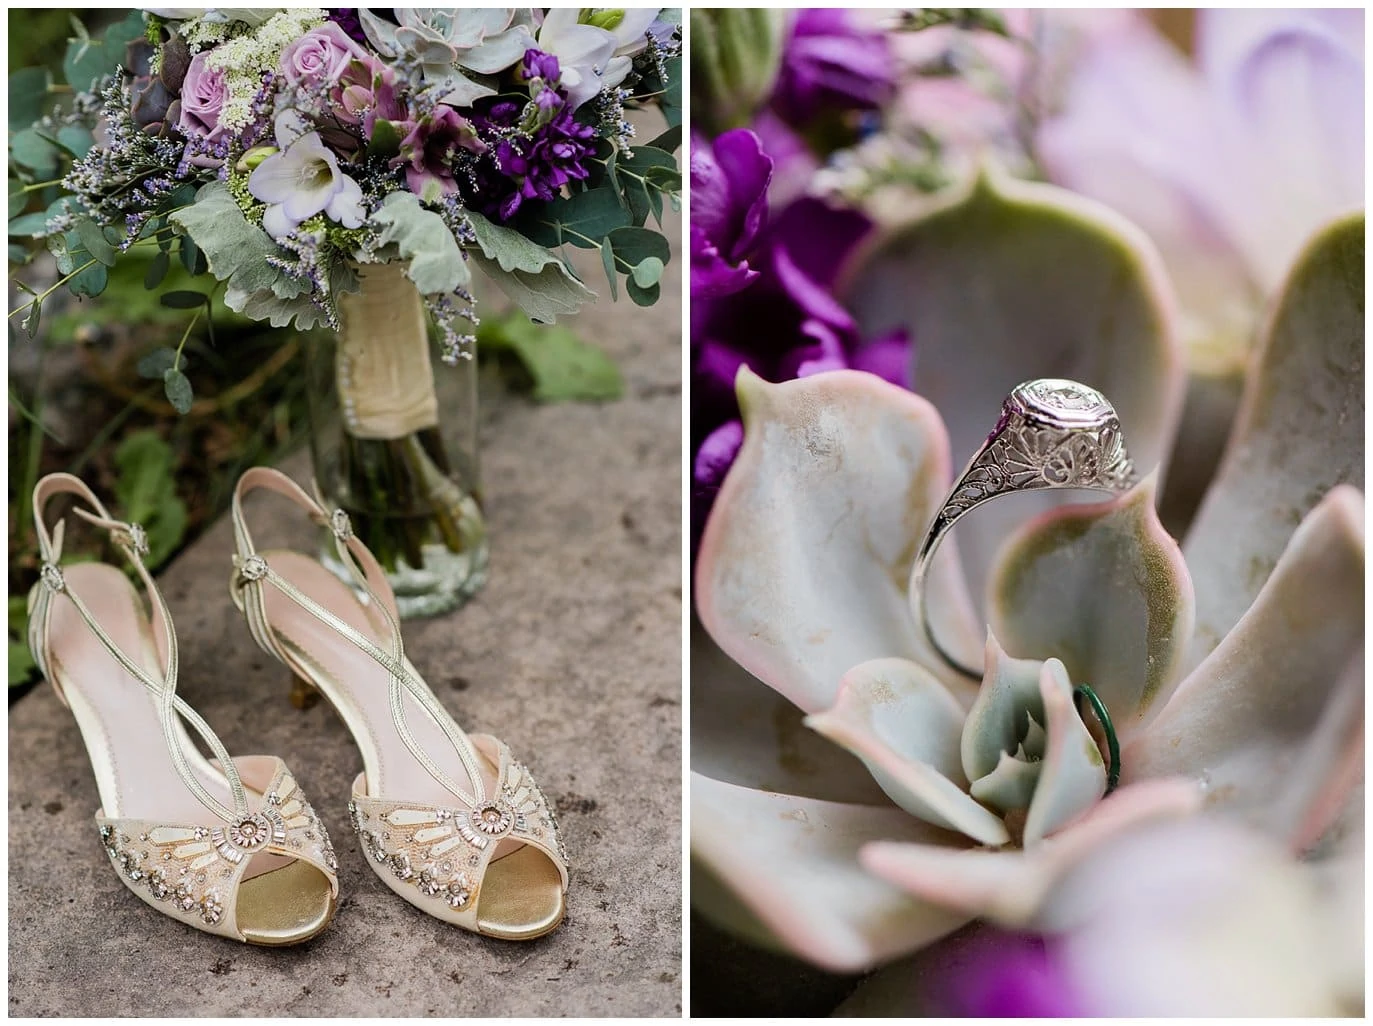 sparkly shoes and custom wedding ring photo